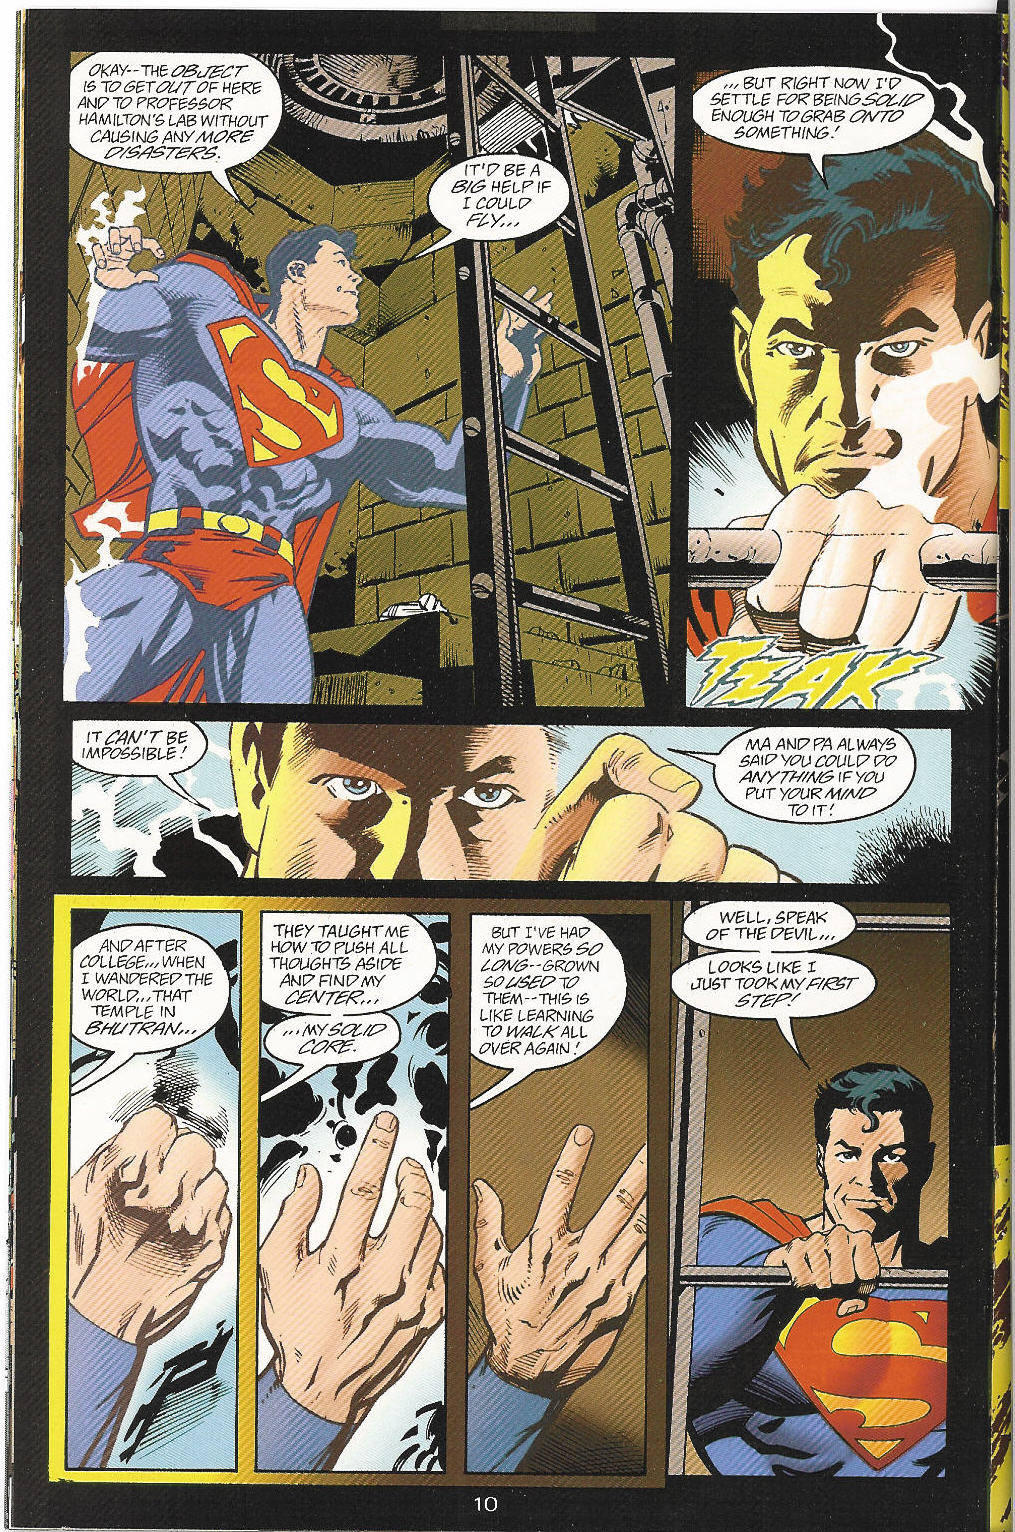 Adventures of Superman (1987) 545 Page 10